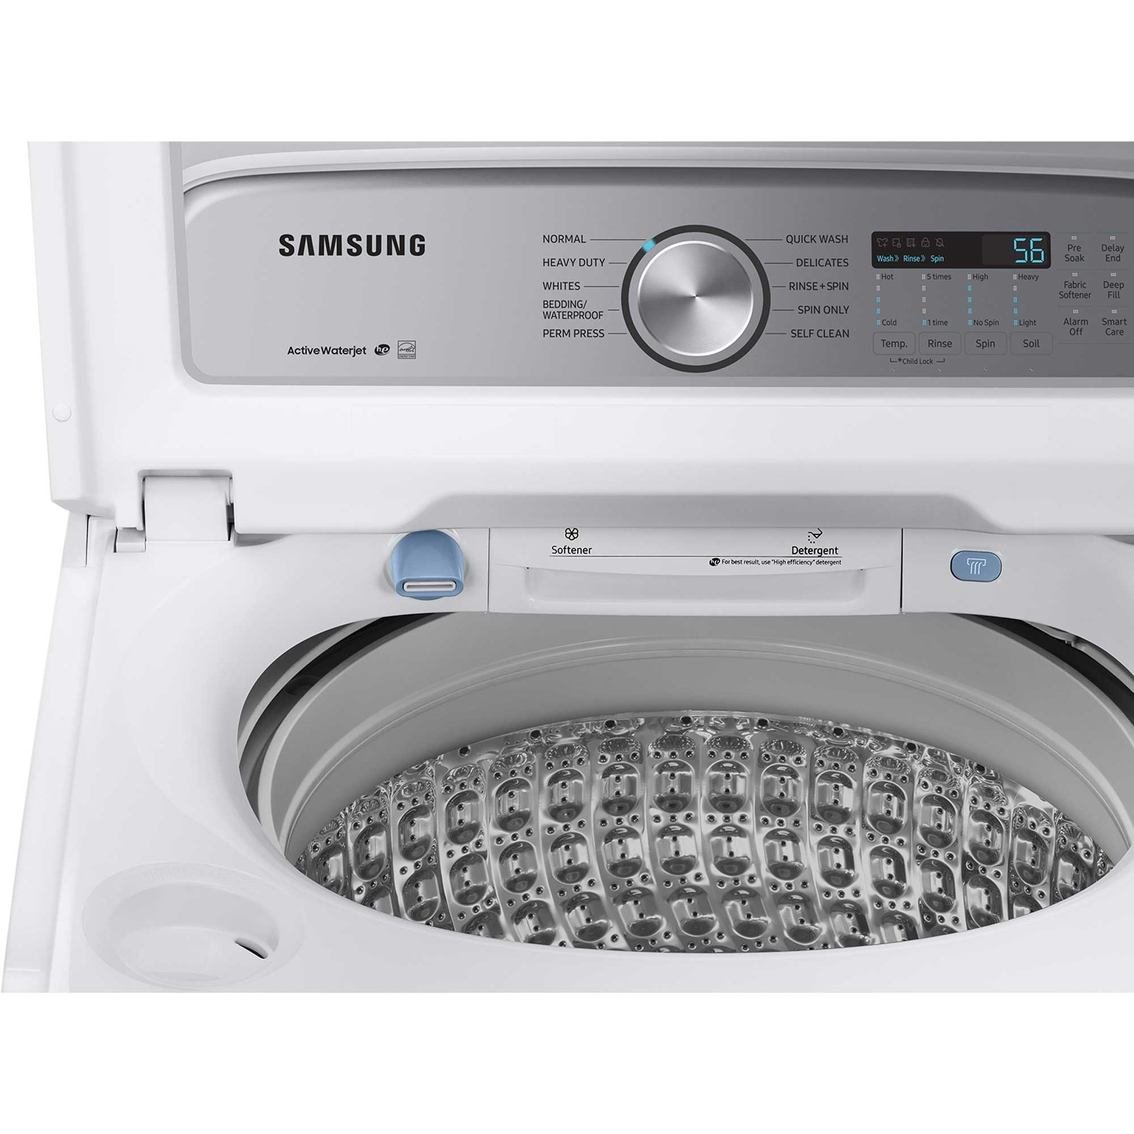 Samsung 4 9 Cu Ft Top Load Washer With Activewave Agitator And Active 